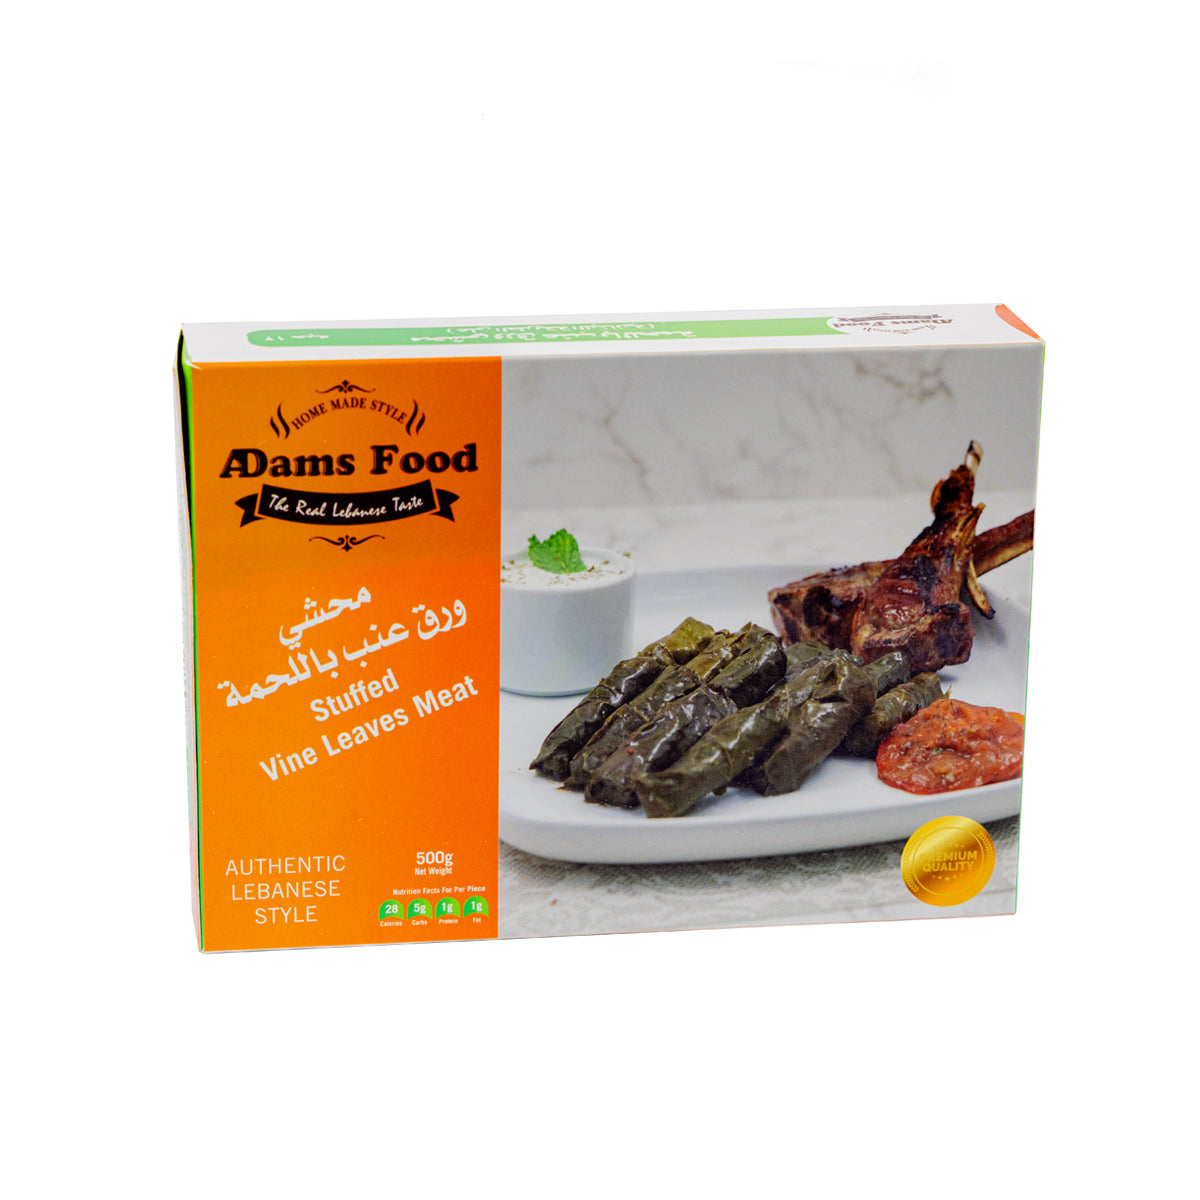 Stuffed Vine Leaves with Meat 500g